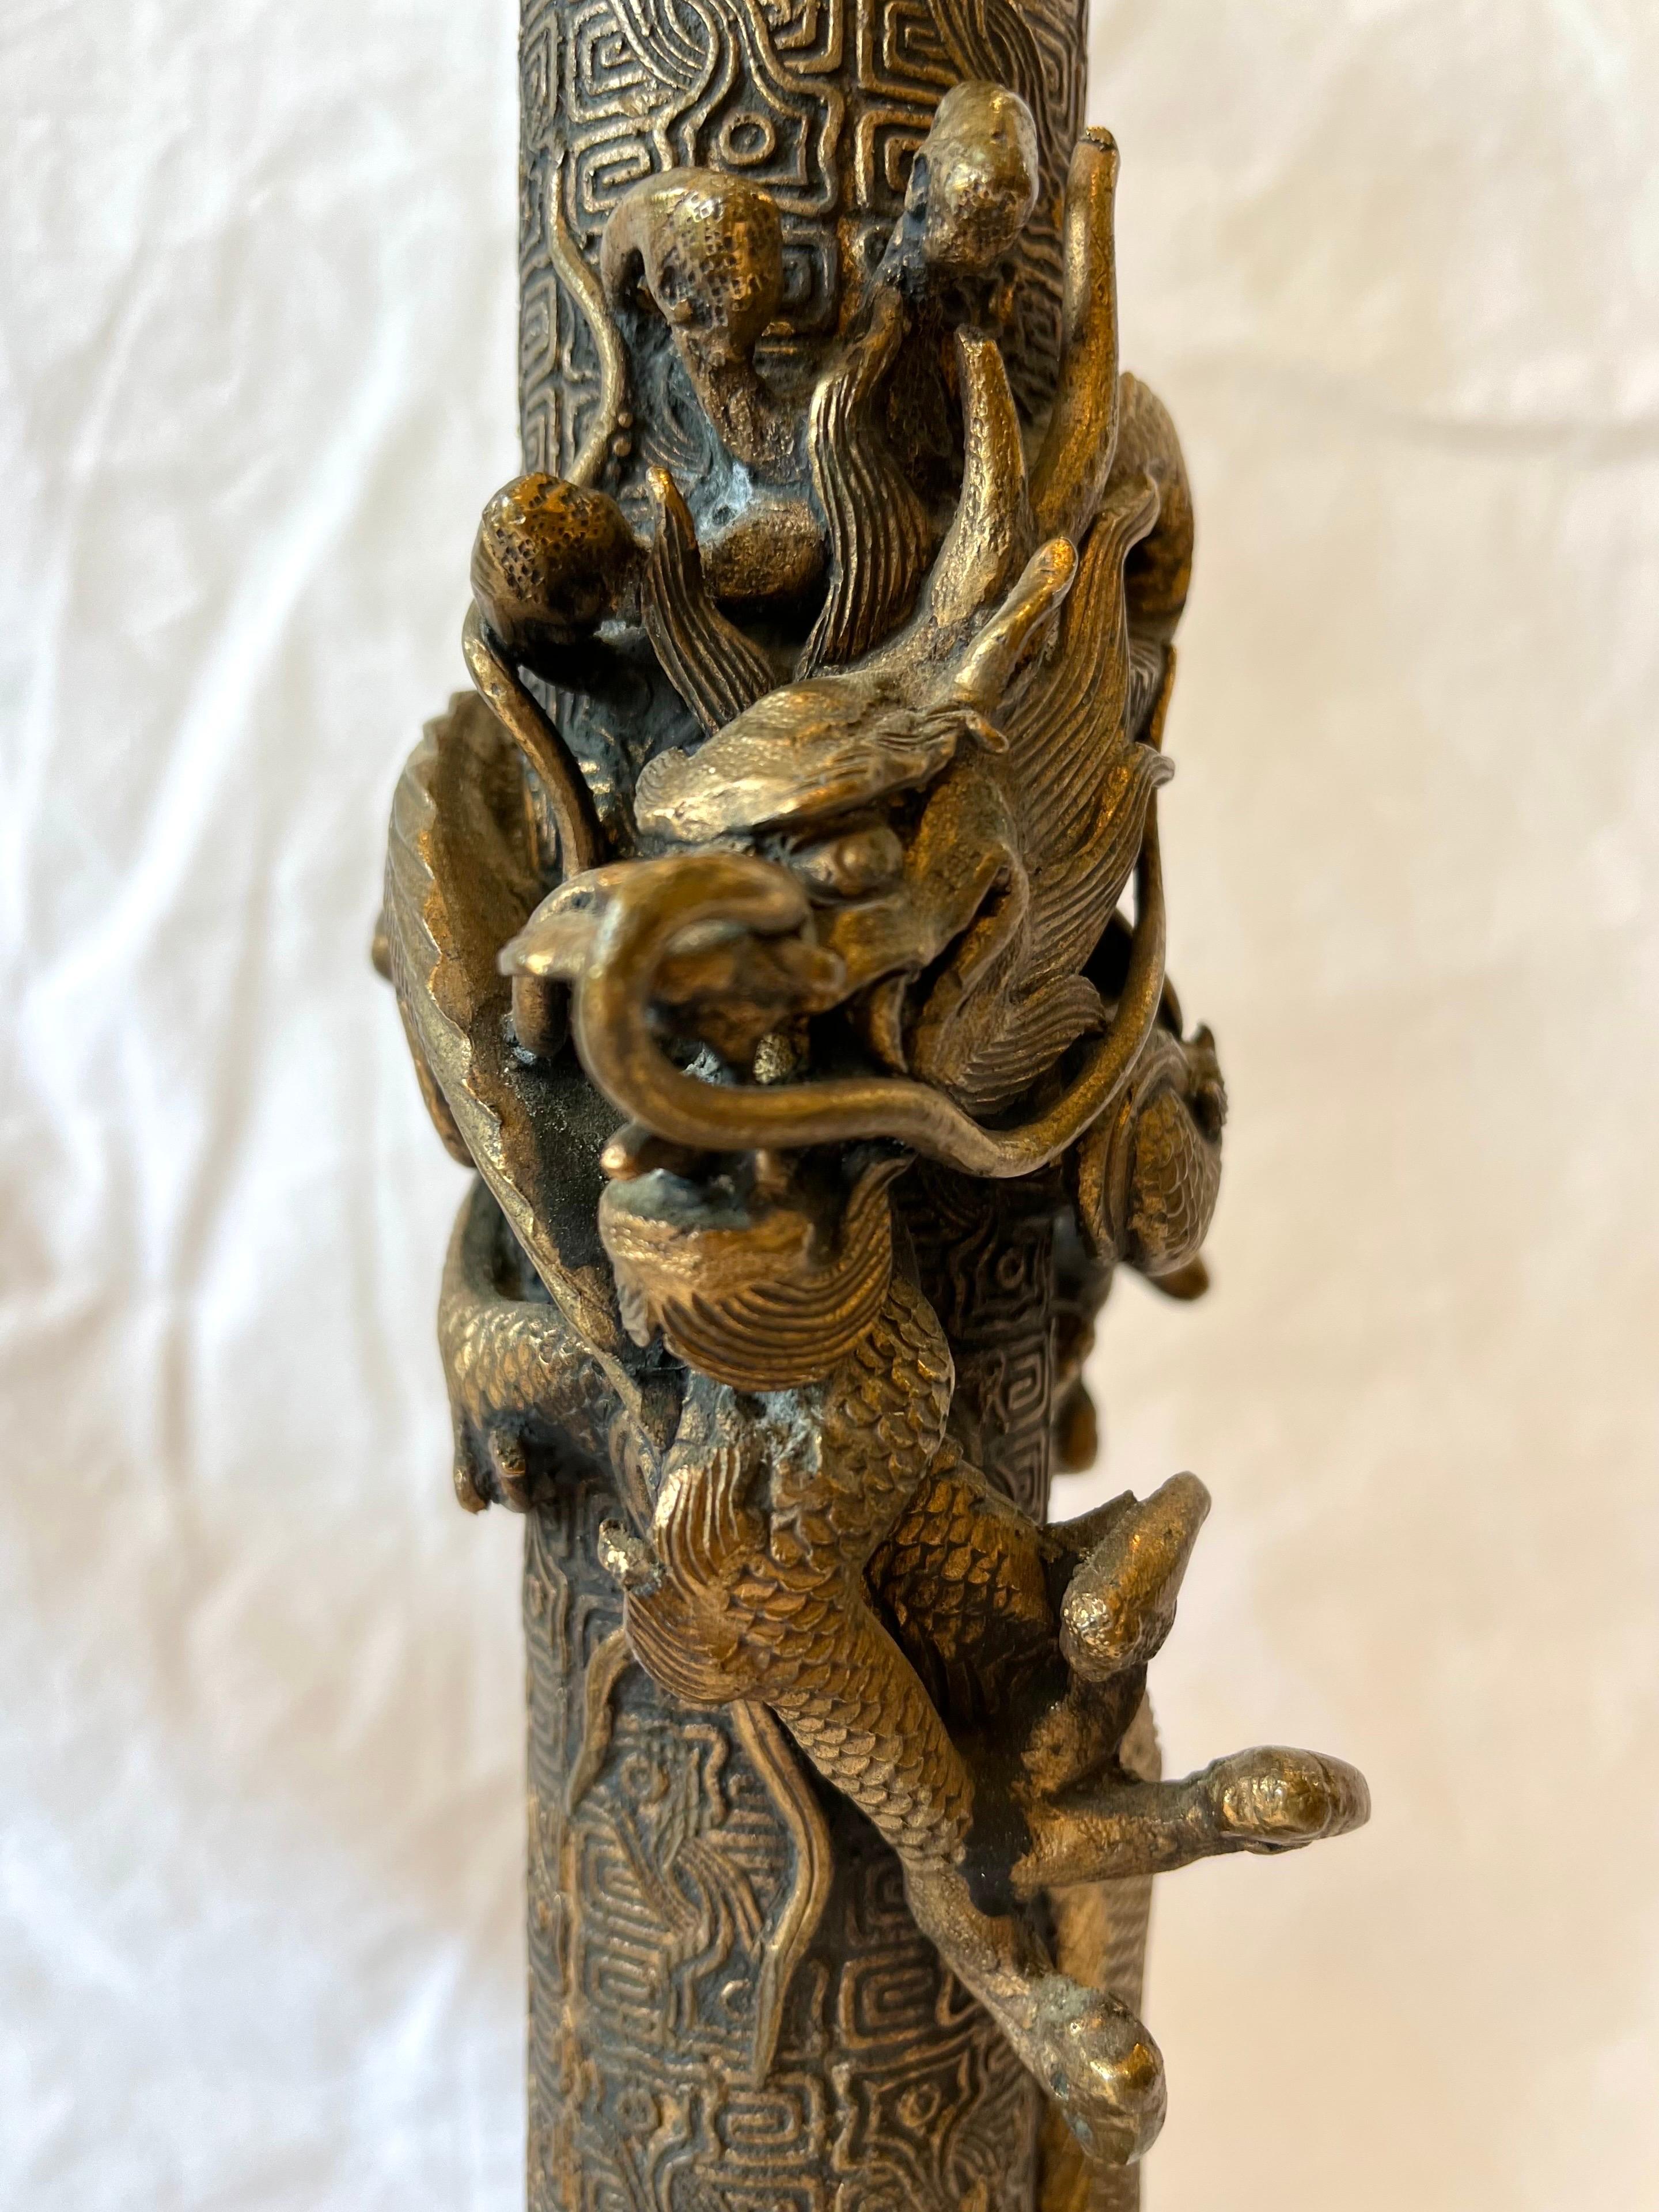 20th Century Vintage Pair of Asian Lamps with Coiling Dragons on Highly Detailed Support